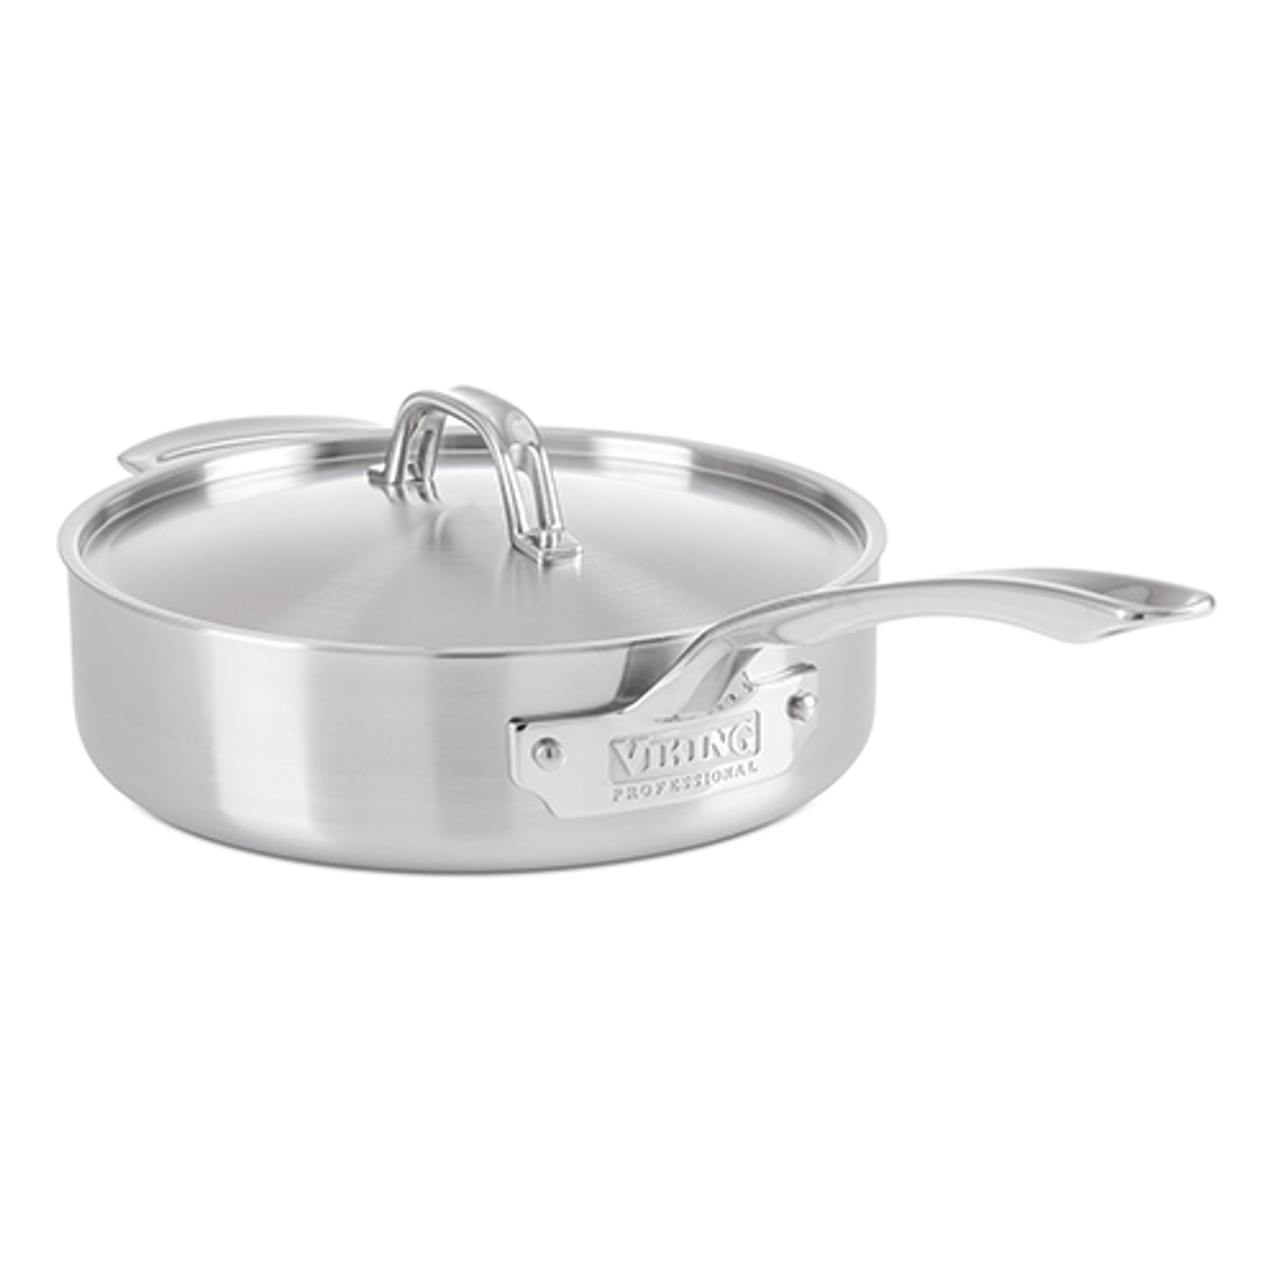 5-Quart Tri-Ply Stainless Steel Saute Pan with Lid